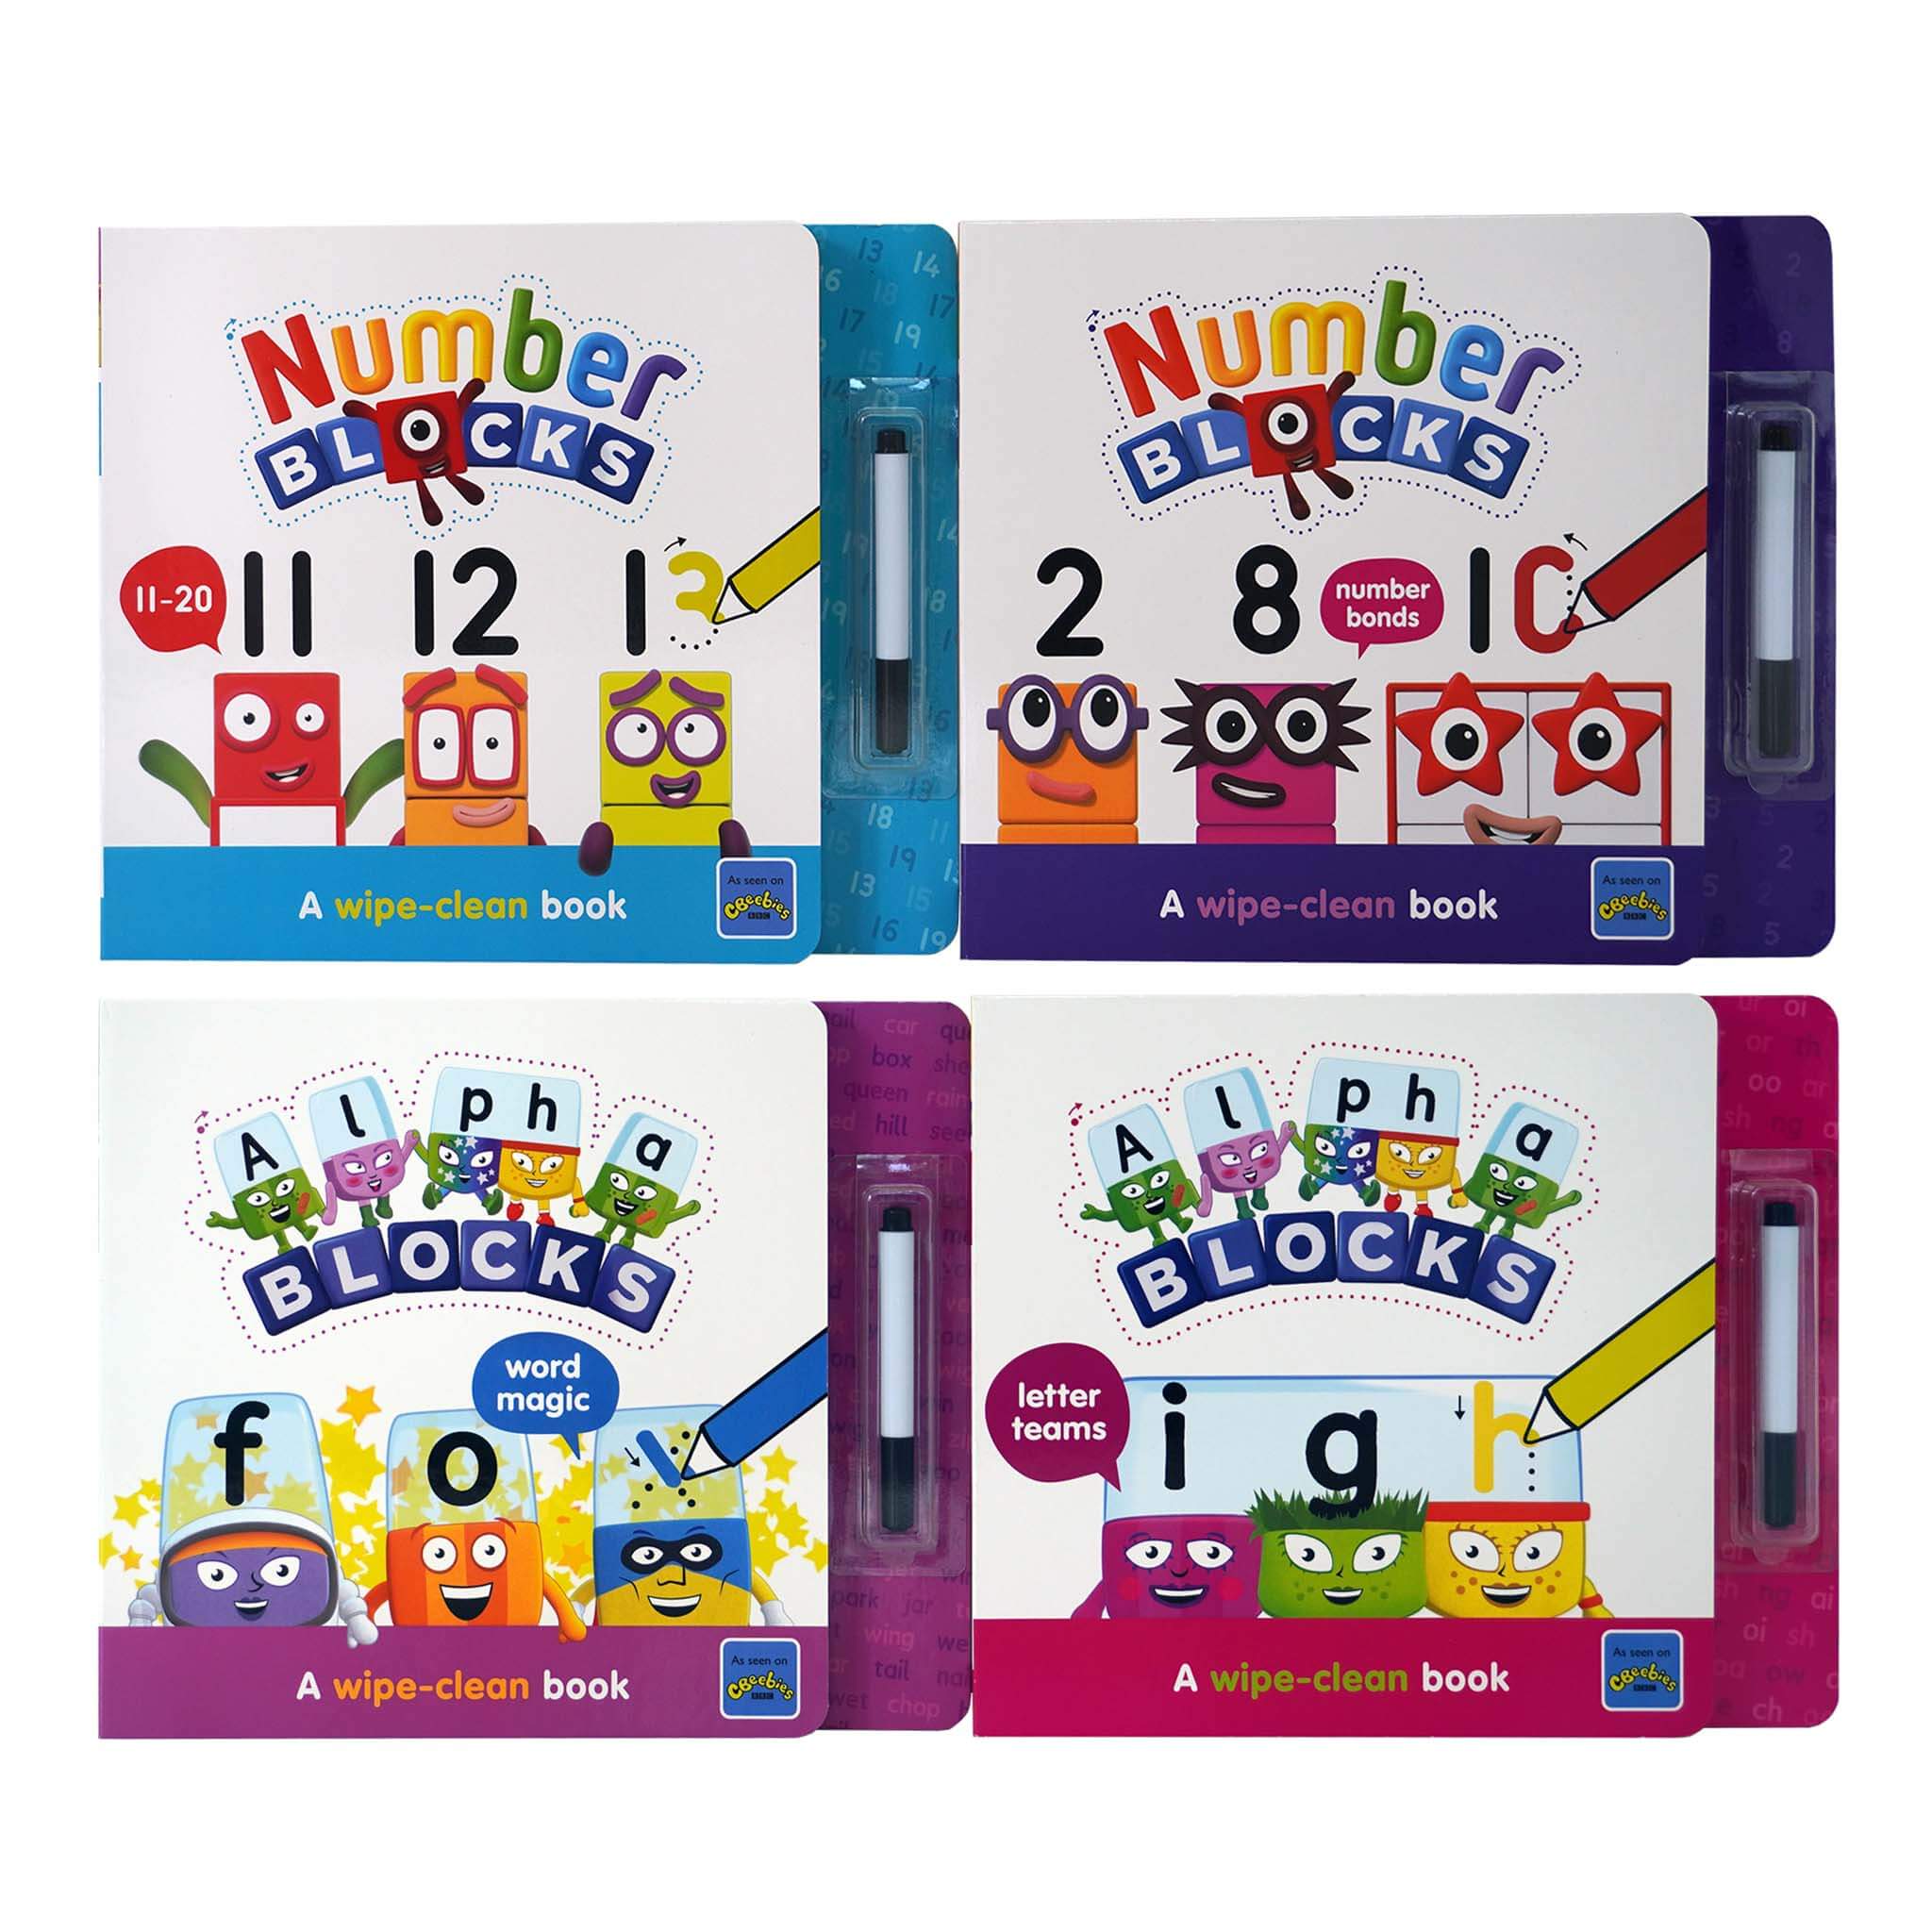 Numberblocks and Alphablocks: Let's Learn Numbers and Letters 4-Book Wipe-Clean Box Set with pens By Sweet Cherry Publishing - Ages 3-6 - Board Book